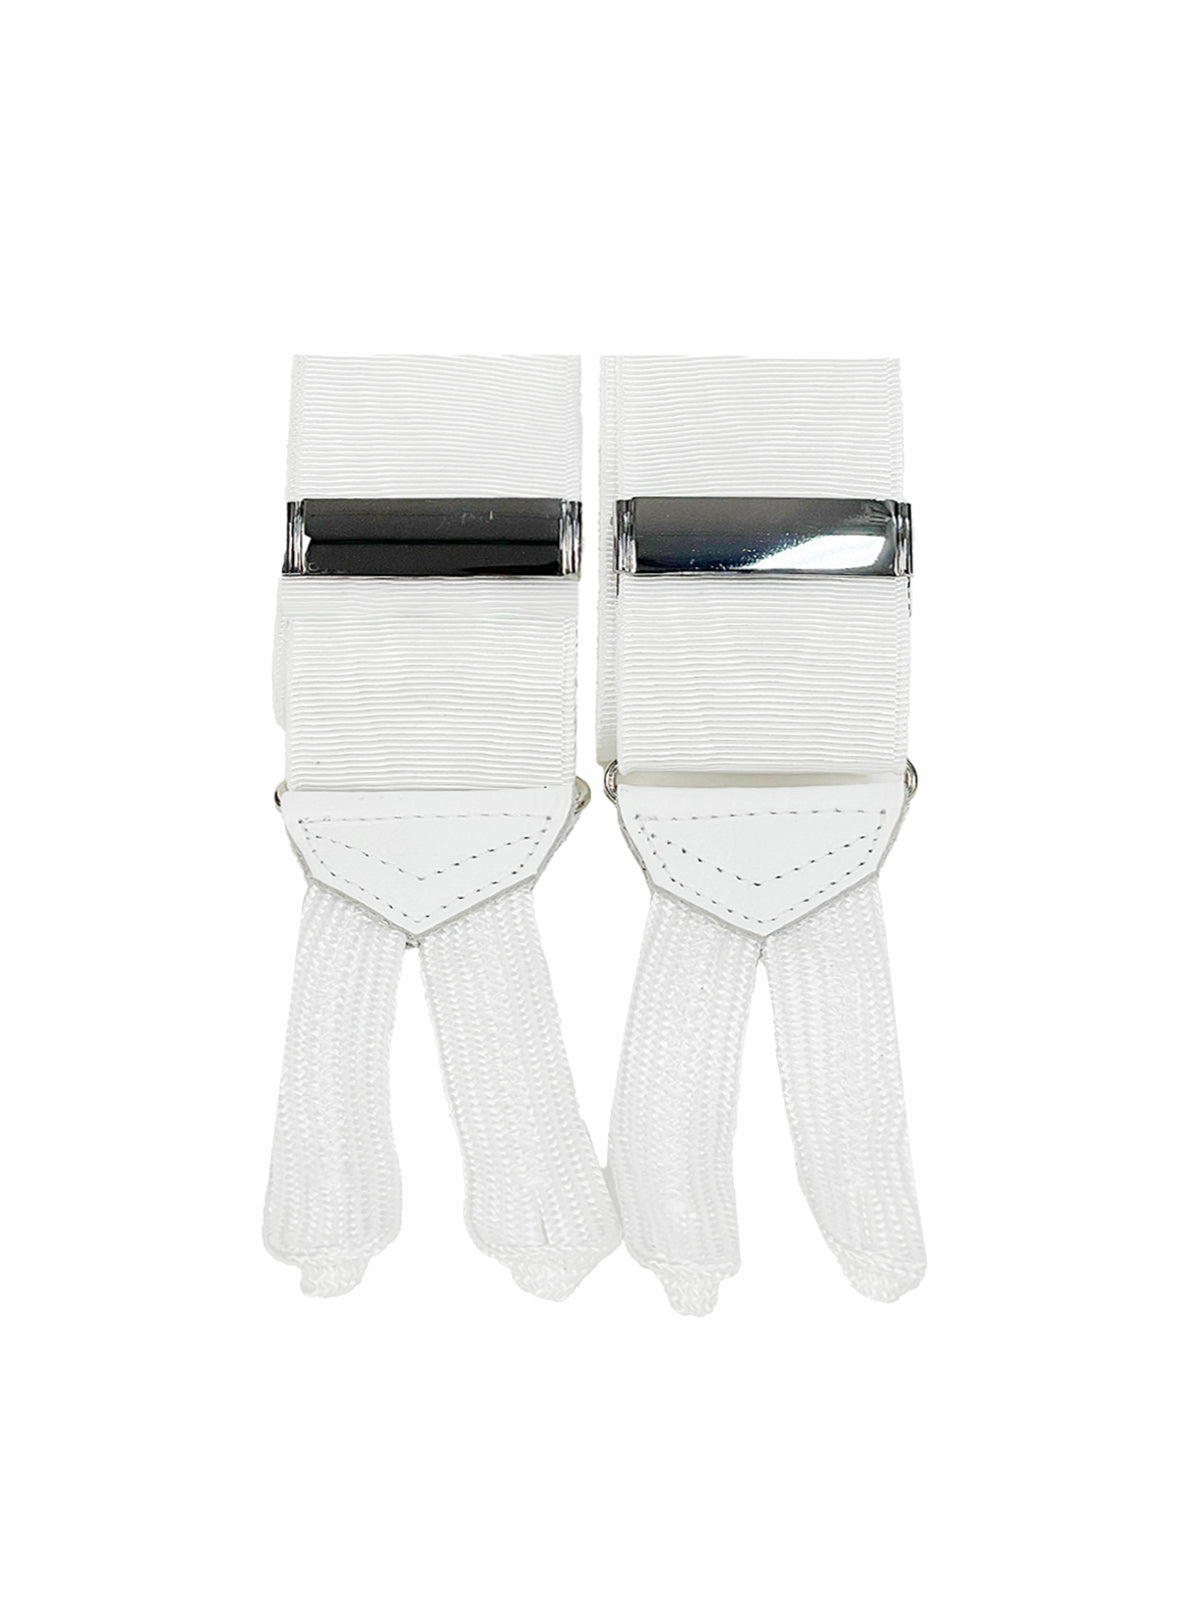 White Silk Moire Braces With Braid Ends